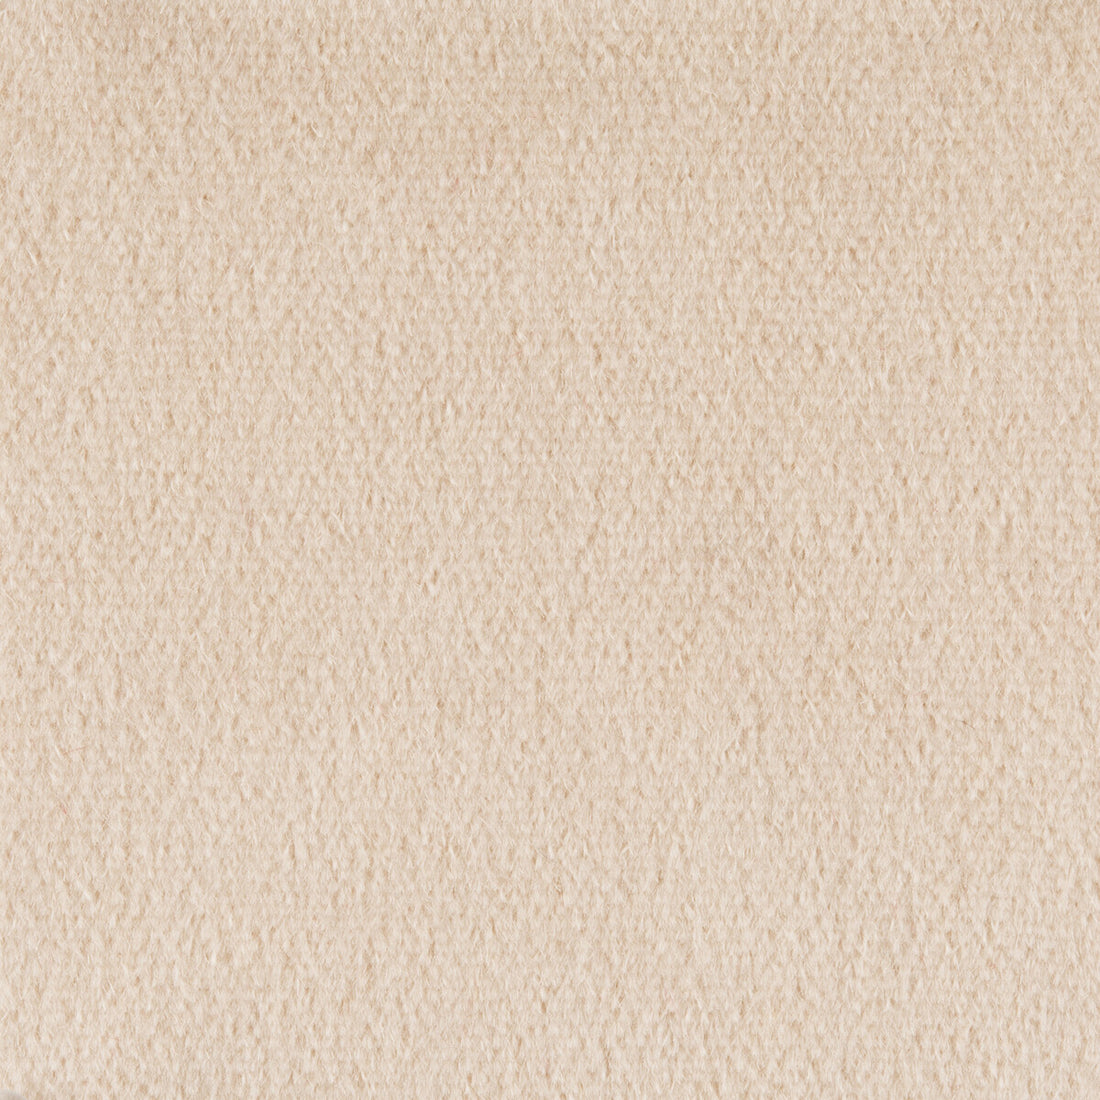 Autun Mohair Velvet fabric in champagne color - pattern BR-89778.012.0 - by Brunschwig &amp; Fils